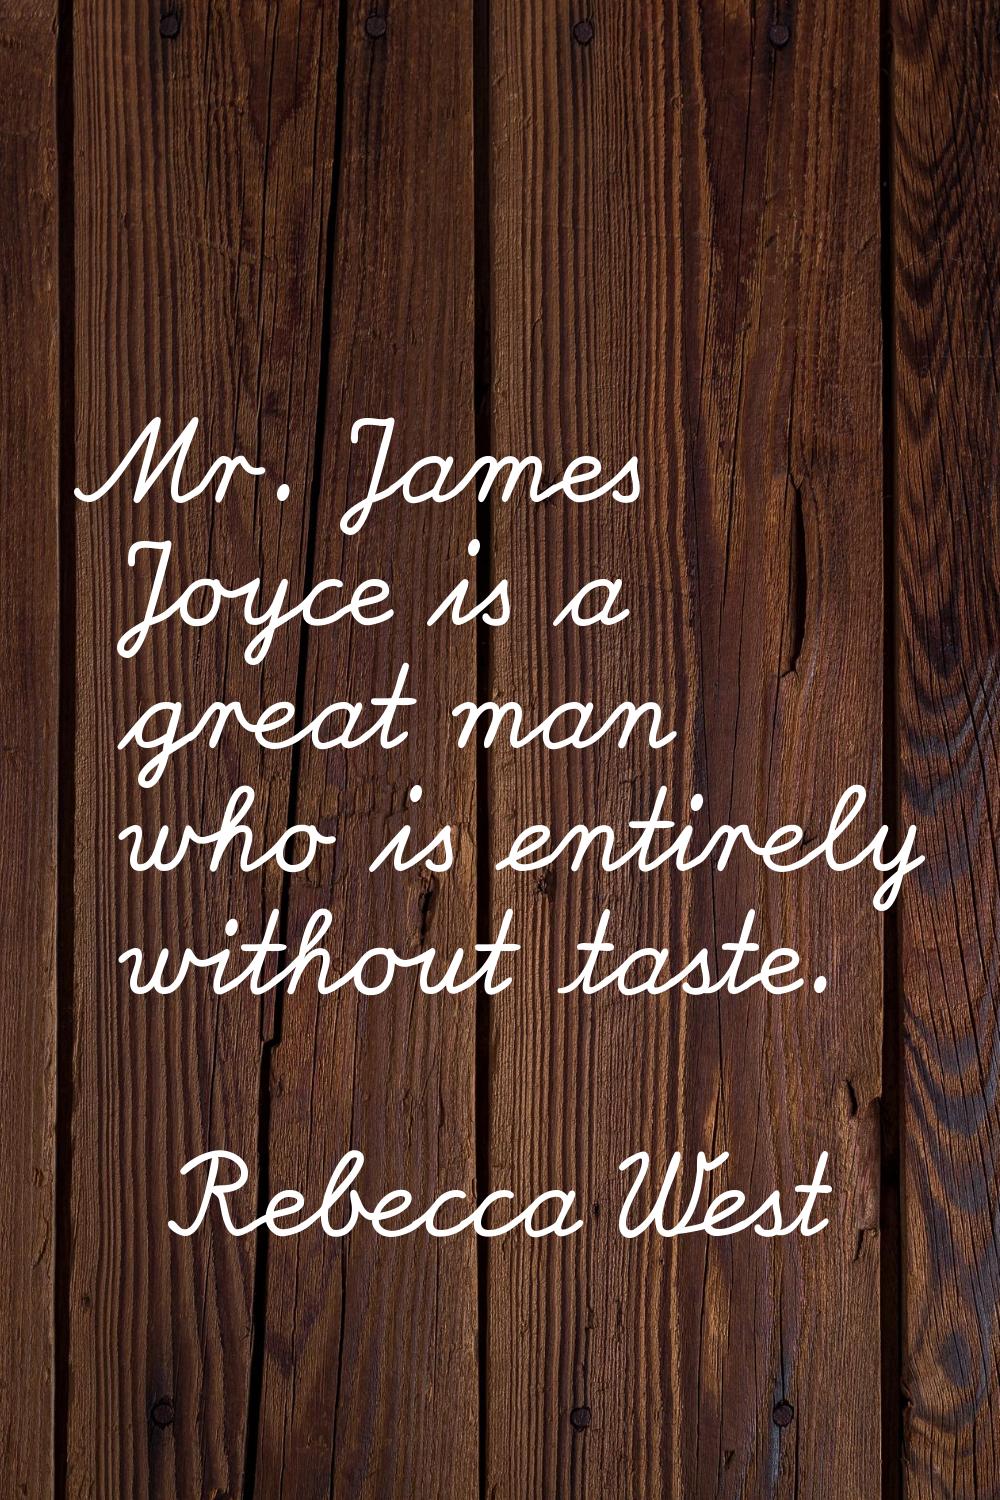 Mr. James Joyce is a great man who is entirely without taste.